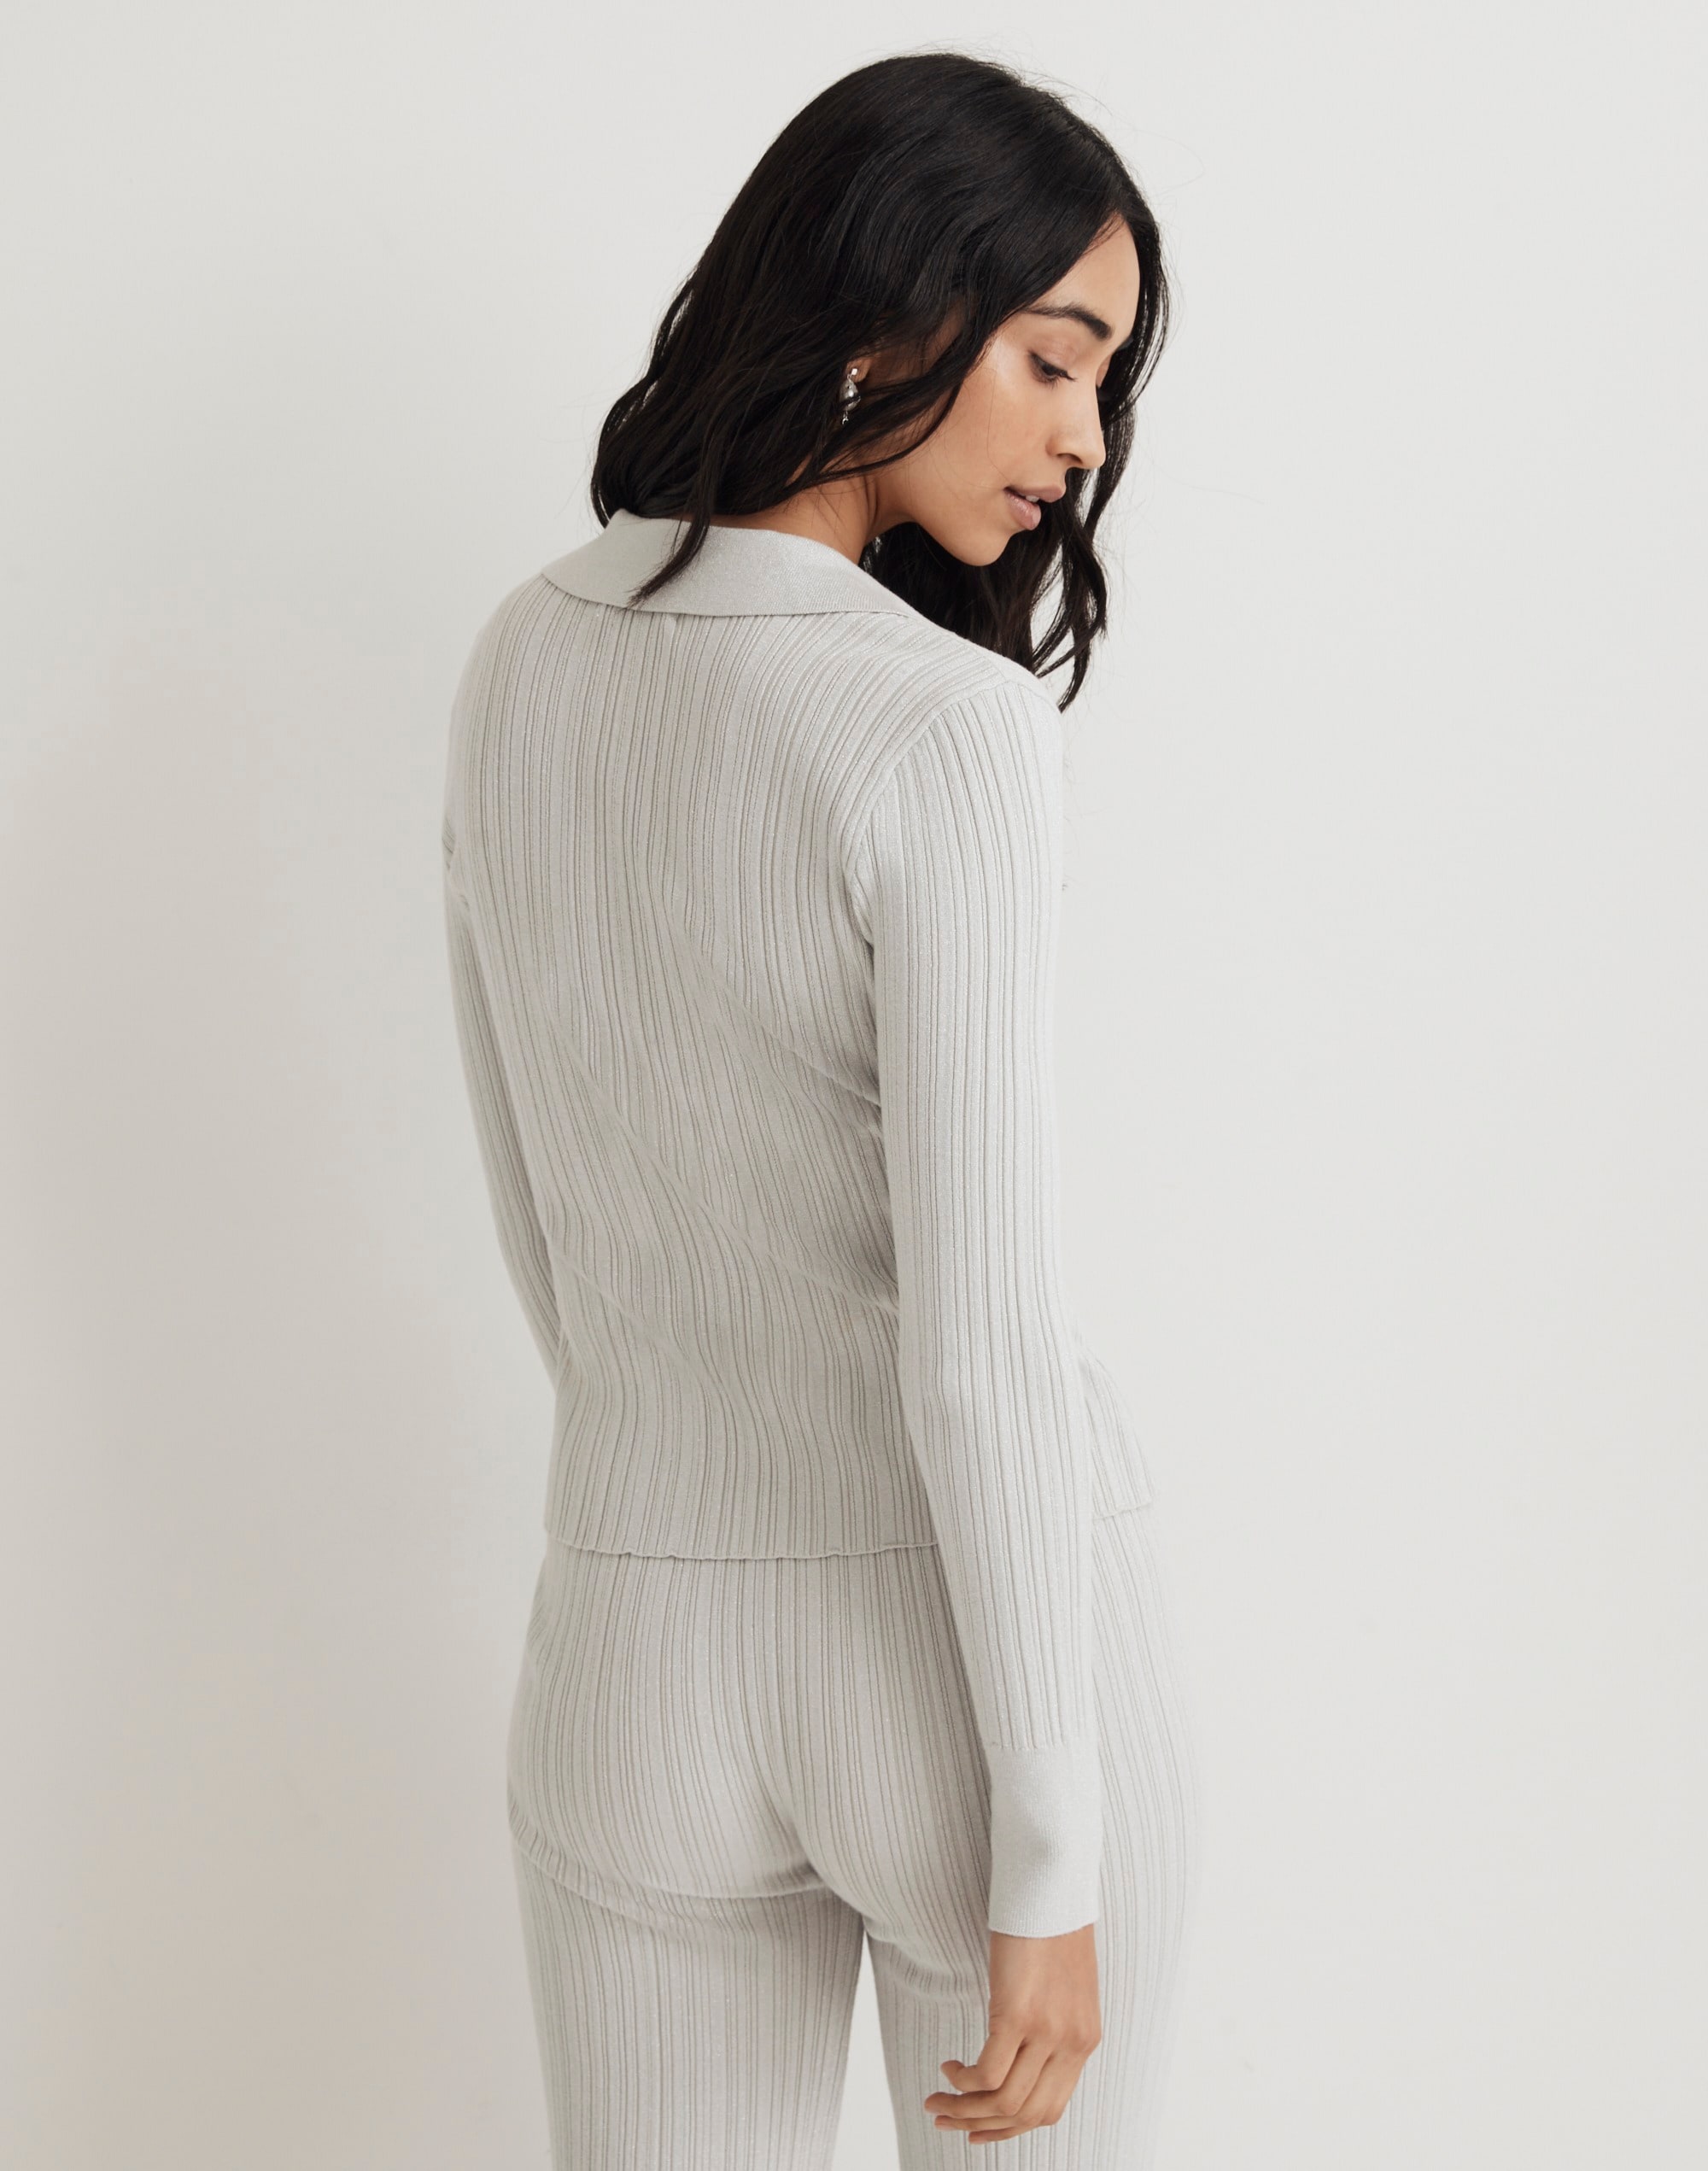 Madewell x Aimee Song Shimmer Polo Sweater